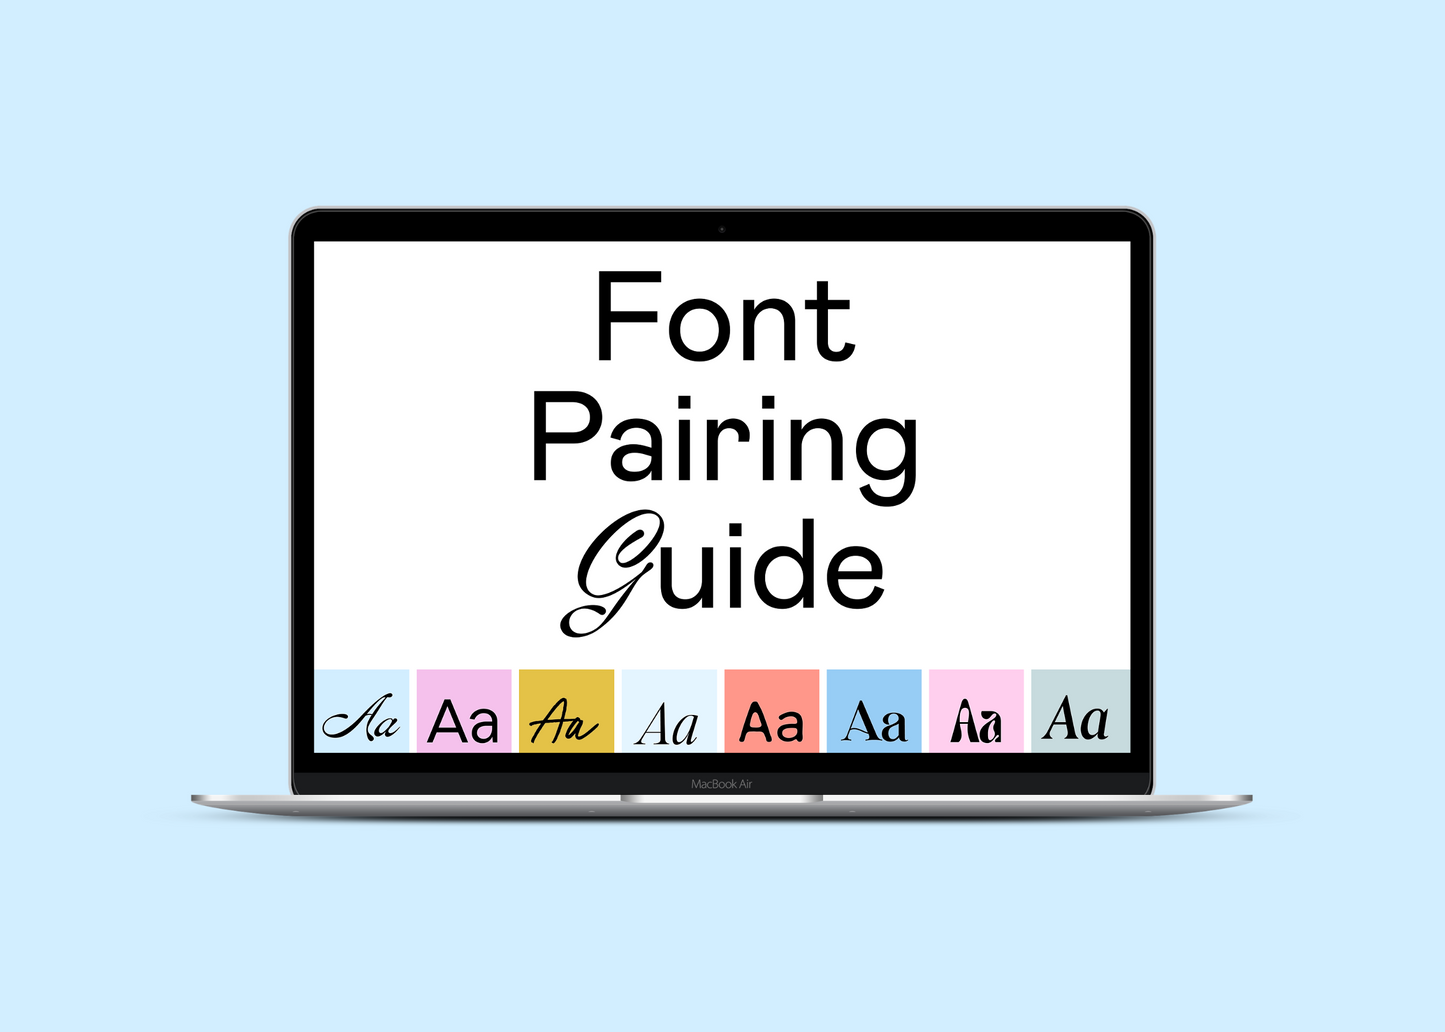 Font Pairing Guide